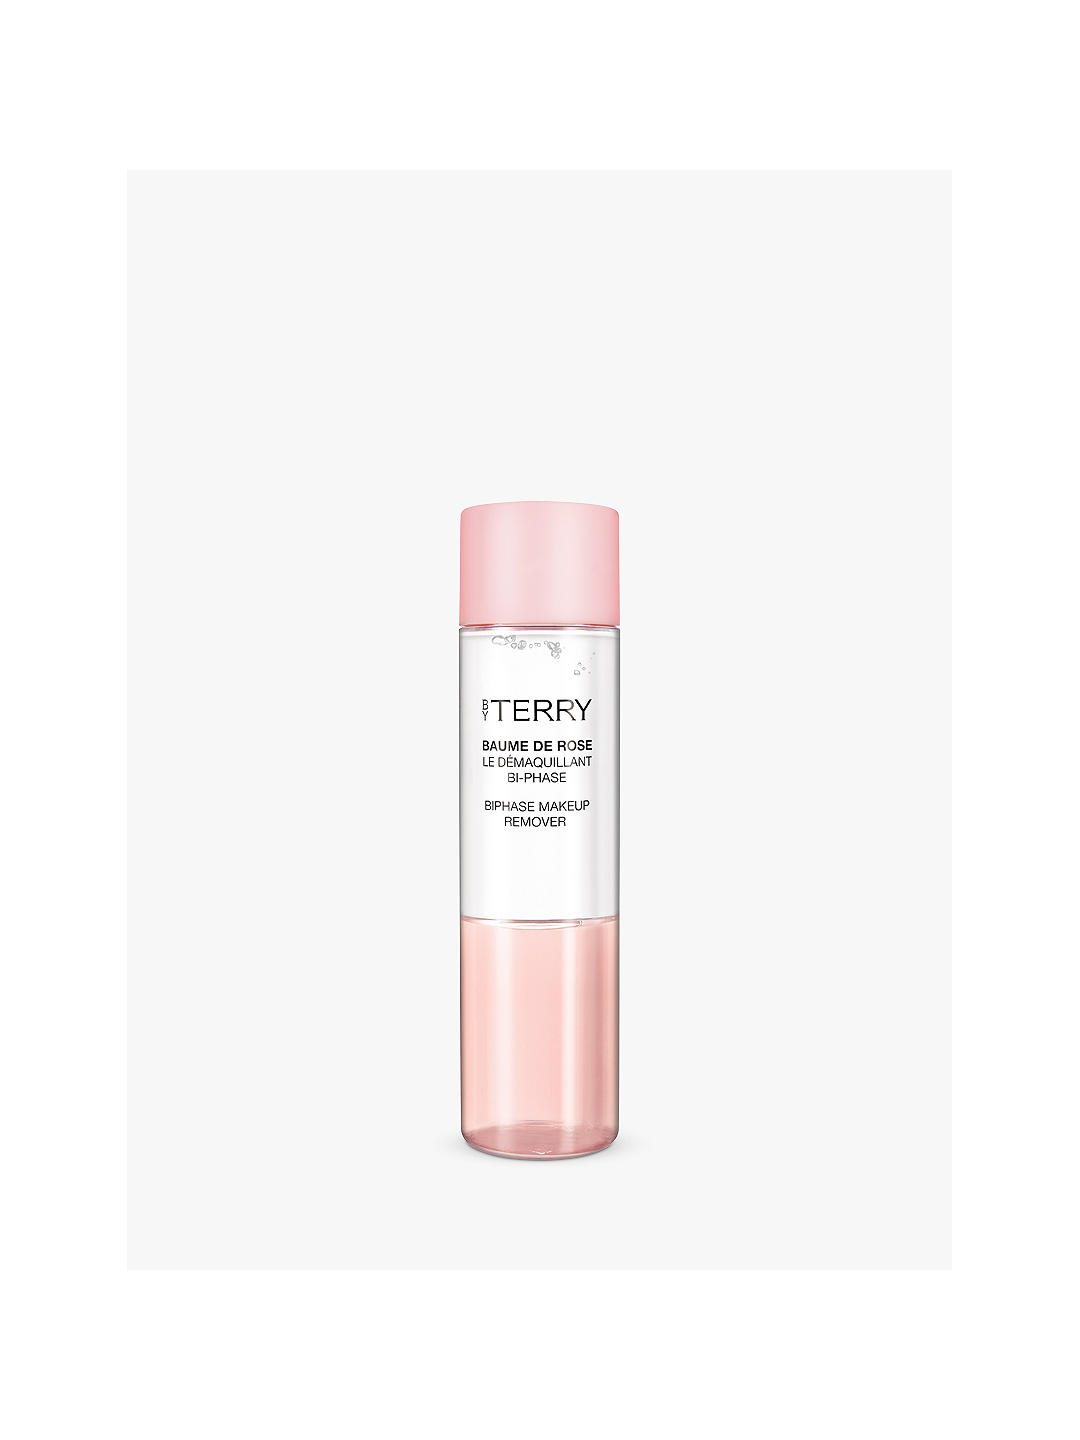 BY TERRY Baume de Rose Bi-Phase Makeup Remover, 200ml 1